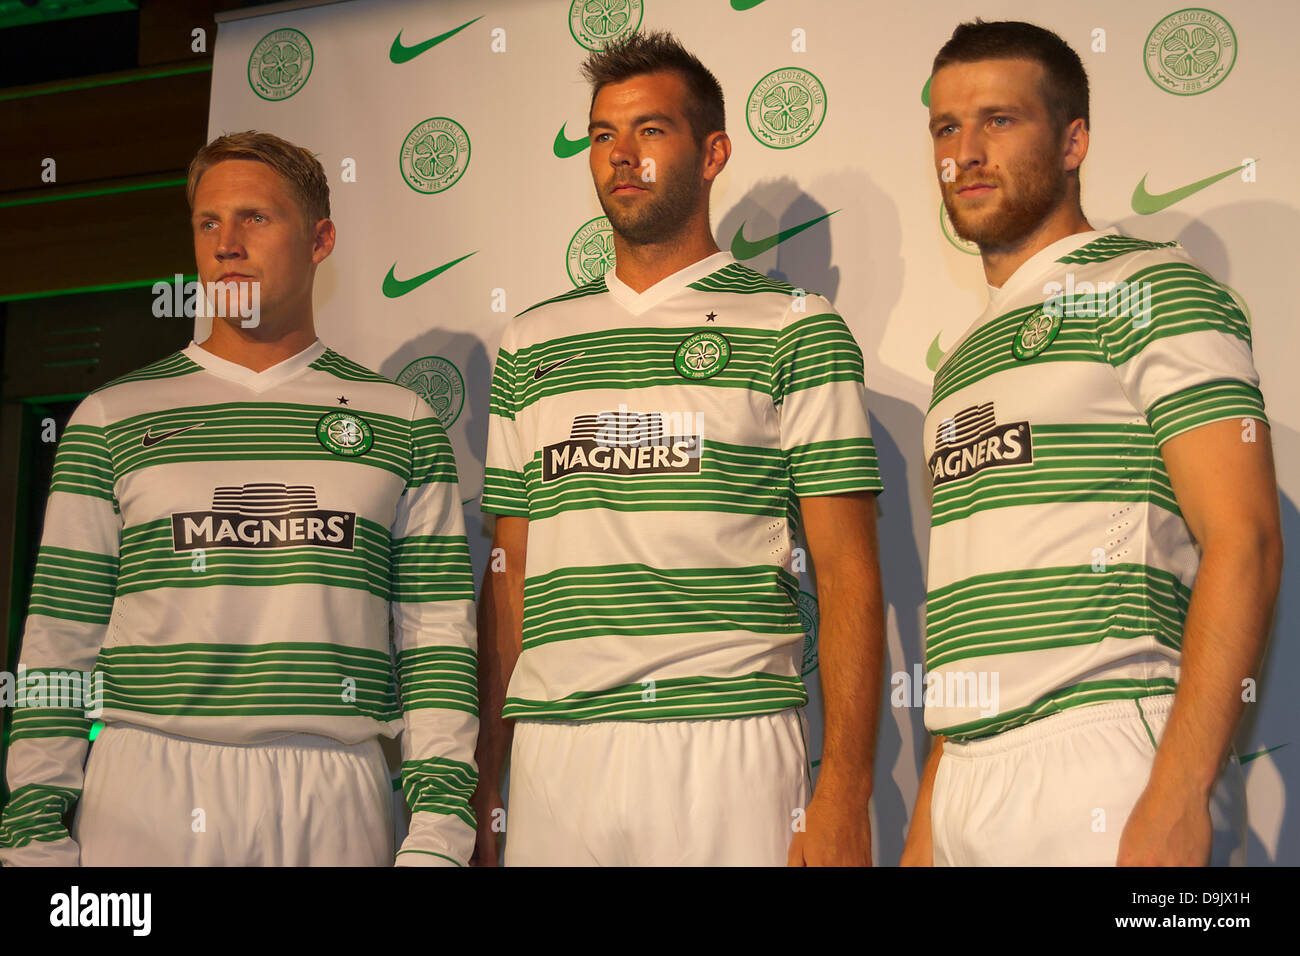 20.06.2013 Glasgow, Scotland. Joe Ledley during the Launch of the